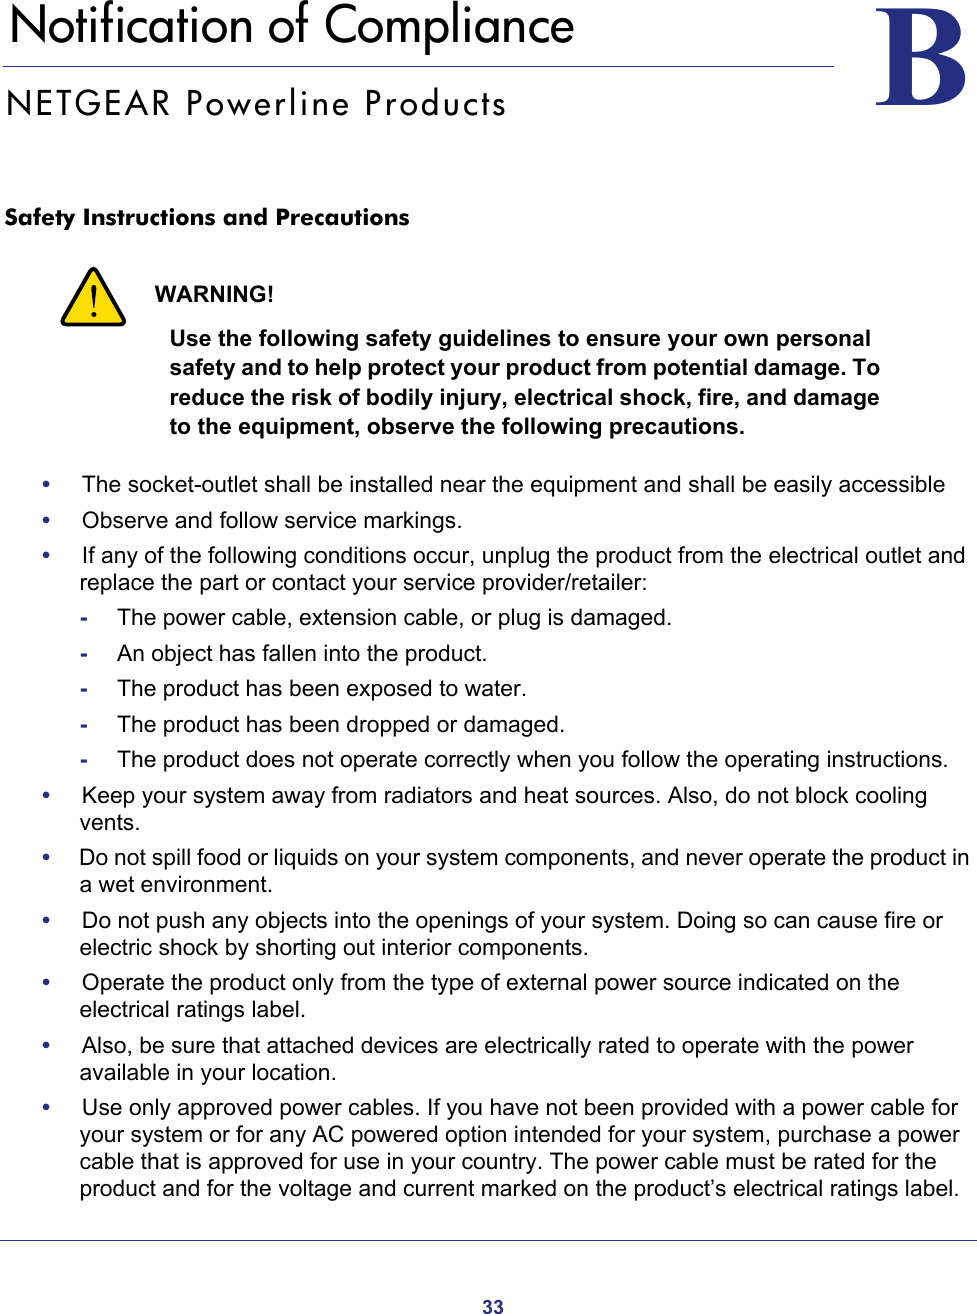 33BB.   Notification of ComplianceNETGEAR Powerline ProductsSafety Instructions and Precautions WARNING!Use the following safety guidelines to ensure your own personal safety and to help protect your product from potential damage. To reduce the risk of bodily injury, electrical shock, fire, and damage to the equipment, observe the following precautions. •     The socket-outlet shall be installed near the equipment and shall be easily accessible•     Observe and follow service markings.•     If any of the following conditions occur, unplug the product from the electrical outlet and replace the part or contact your service provider/retailer:-The power cable, extension cable, or plug is damaged.-An object has fallen into the product.-The product has been exposed to water.-The product has been dropped or damaged.-The product does not operate correctly when you follow the operating instructions.•     Keep your system away from radiators and heat sources. Also, do not block cooling vents.•     Do not spill food or liquids on your system components, and never operate the product in a wet environment.•     Do not push any objects into the openings of your system. Doing so can cause fire or electric shock by shorting out interior components.•     Operate the product only from the type of external power source indicated on the electrical ratings label. •     Also, be sure that attached devices are electrically rated to operate with the power available in your location.•     Use only approved power cables. If you have not been provided with a power cable for your system or for any AC powered option intended for your system, purchase a power cable that is approved for use in your country. The power cable must be rated for the product and for the voltage and current marked on the product’s electrical ratings label. 